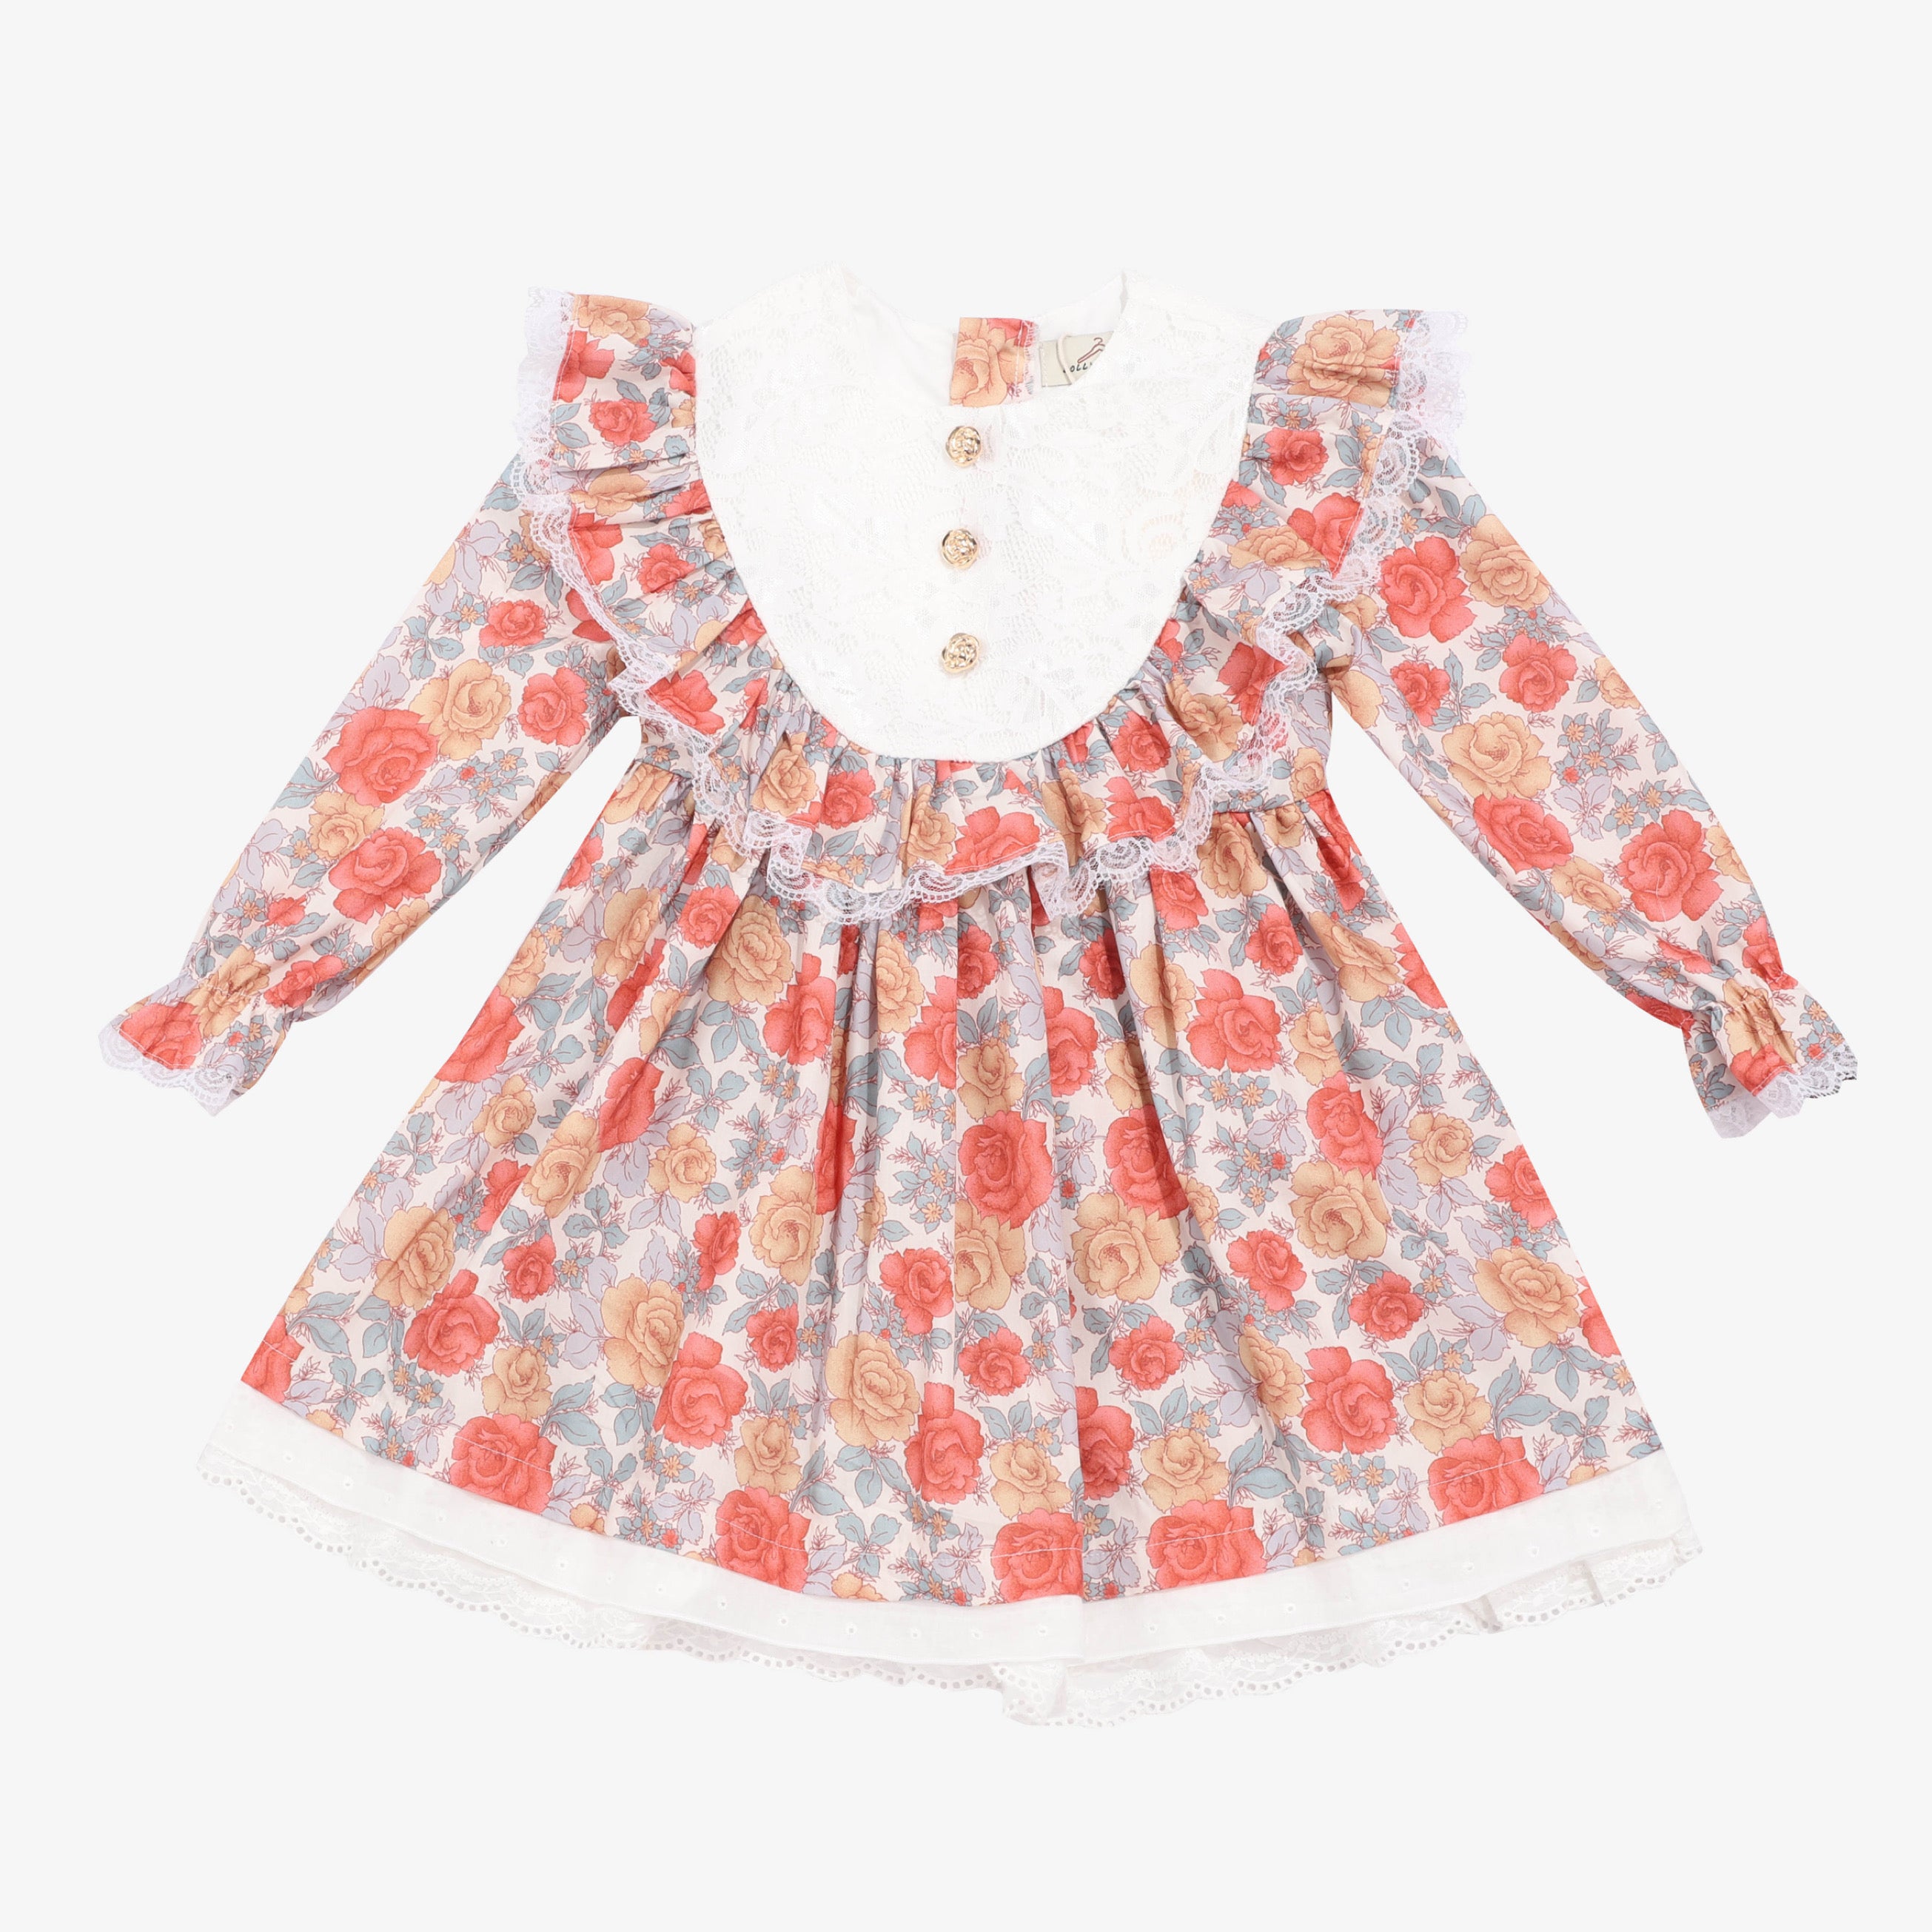 Sophia buttoned Limited addition dress